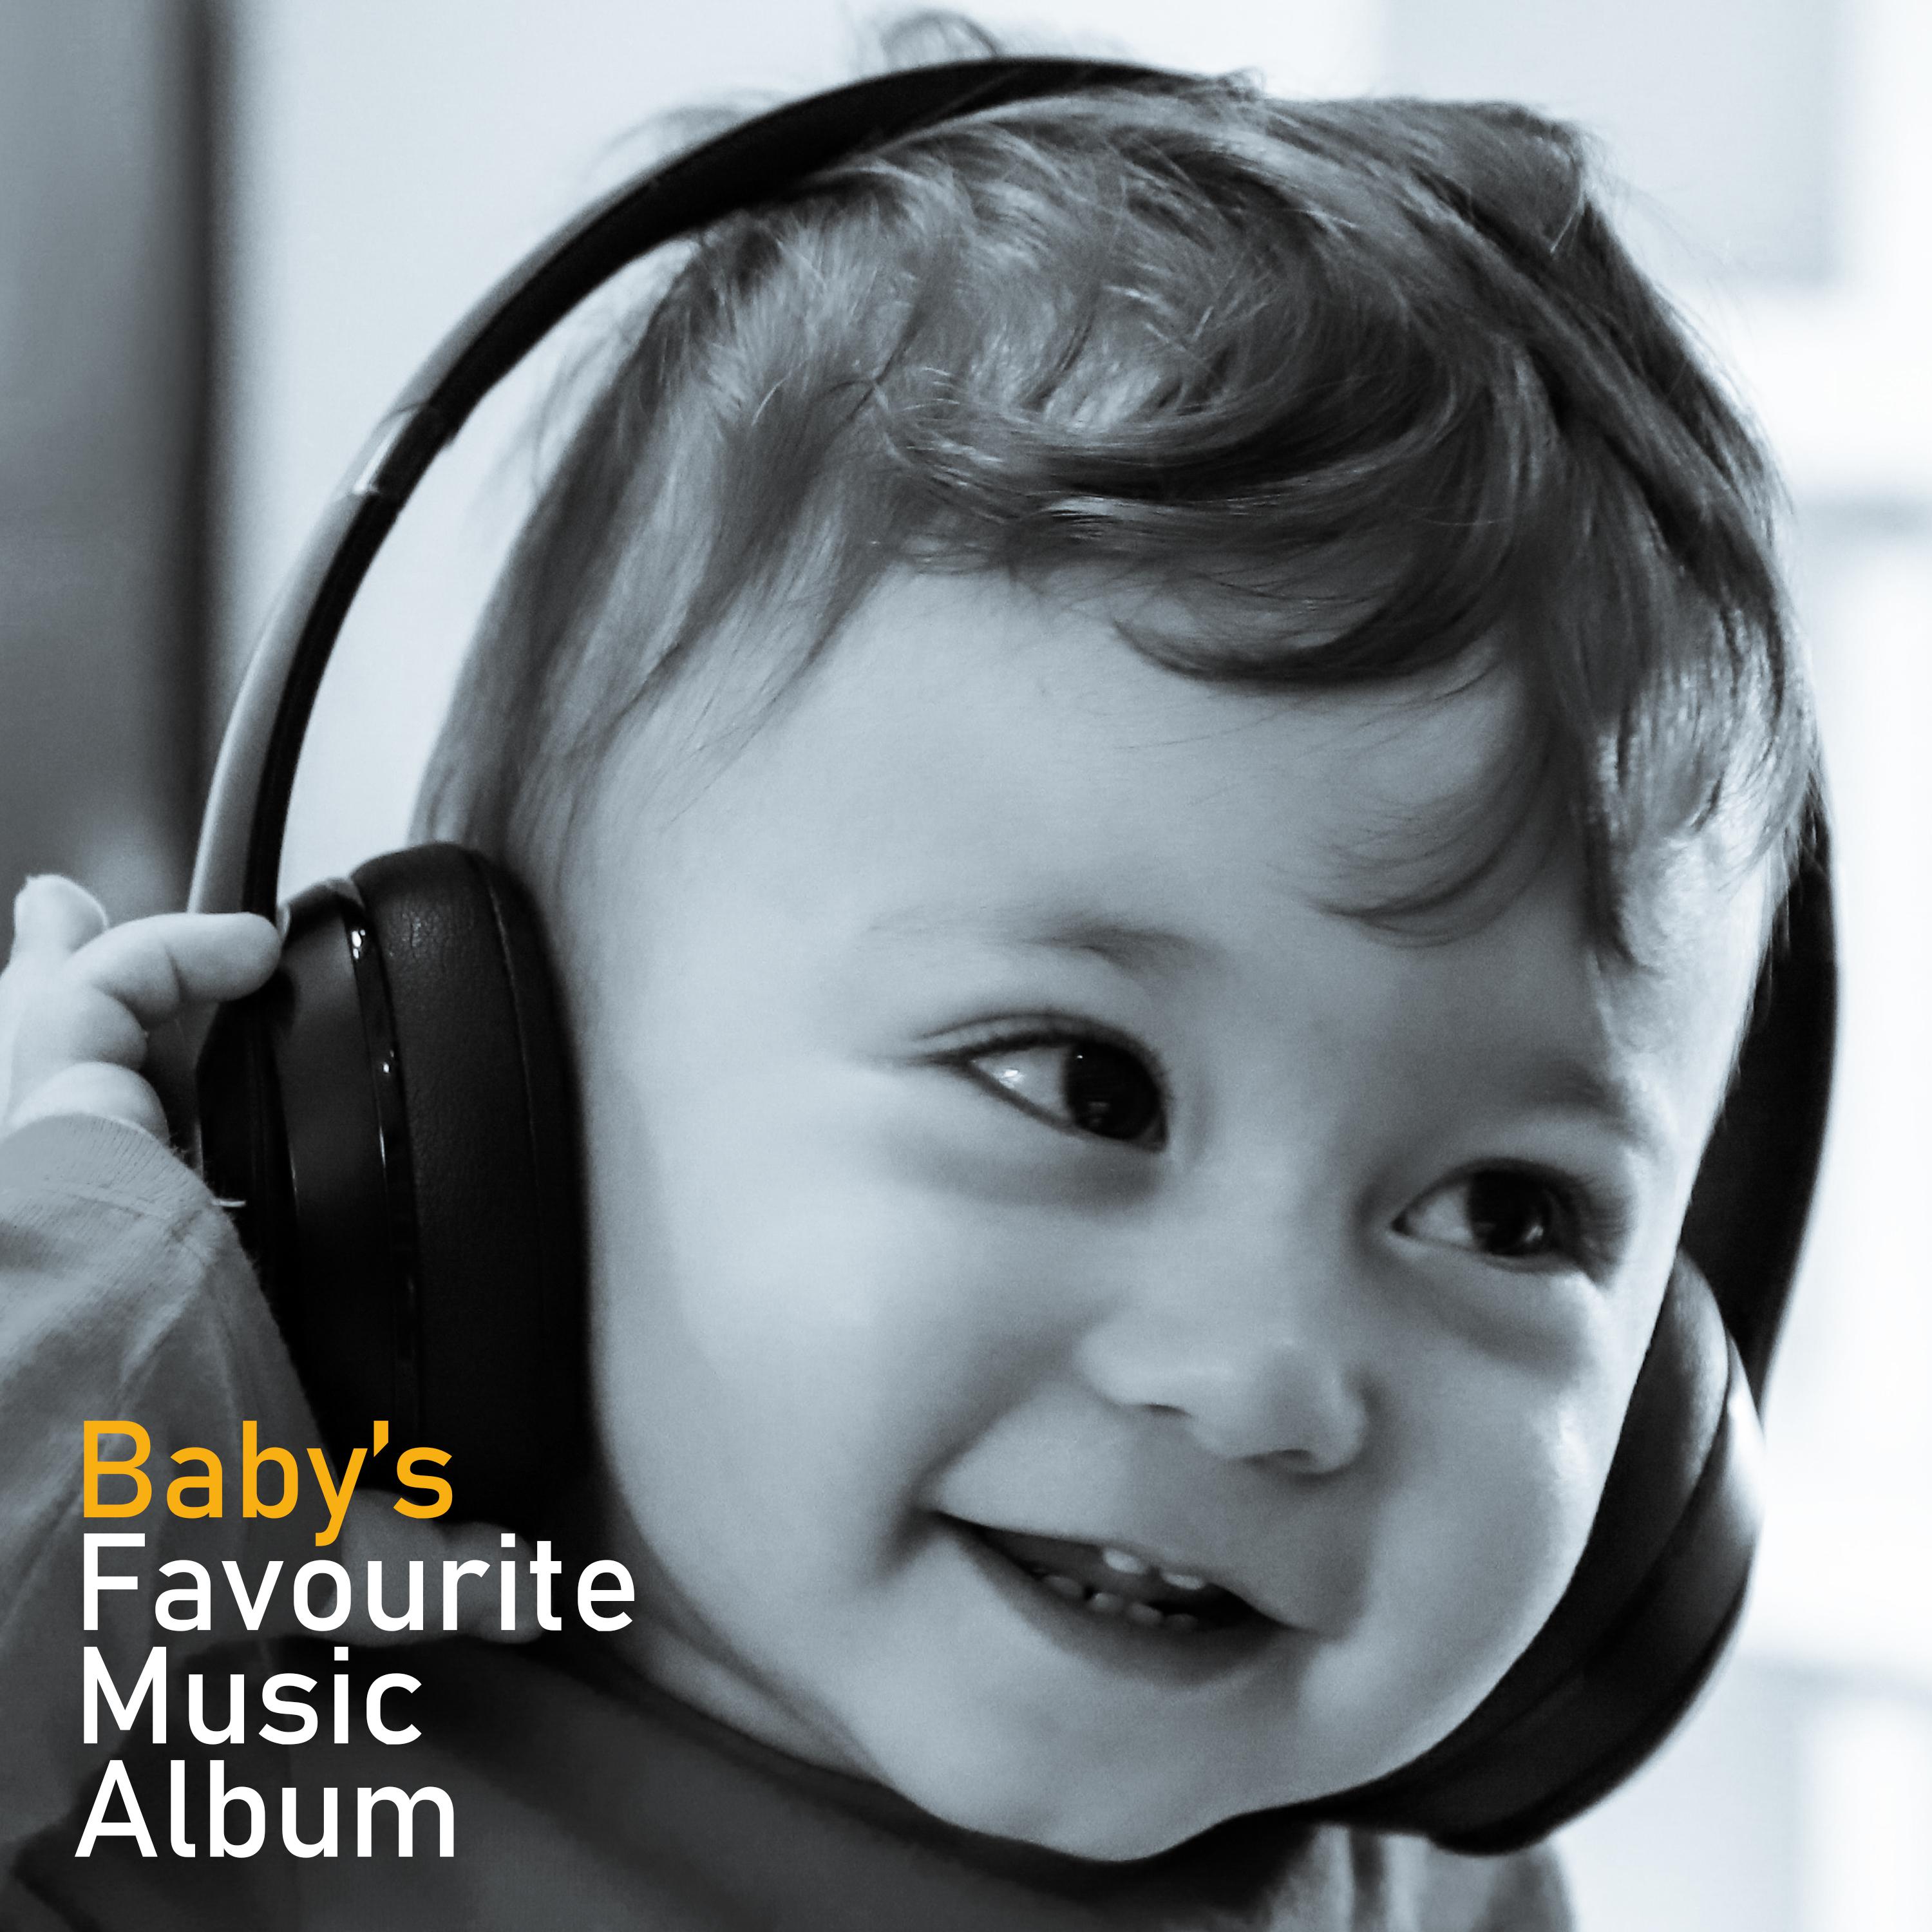 Baby' s Favourite Music Album: 2019 New Age Ambient  Nature Music Mix for Proper Development of the Child' s Body  Mind, Calming Down, Rest  Relax, Good Sleep